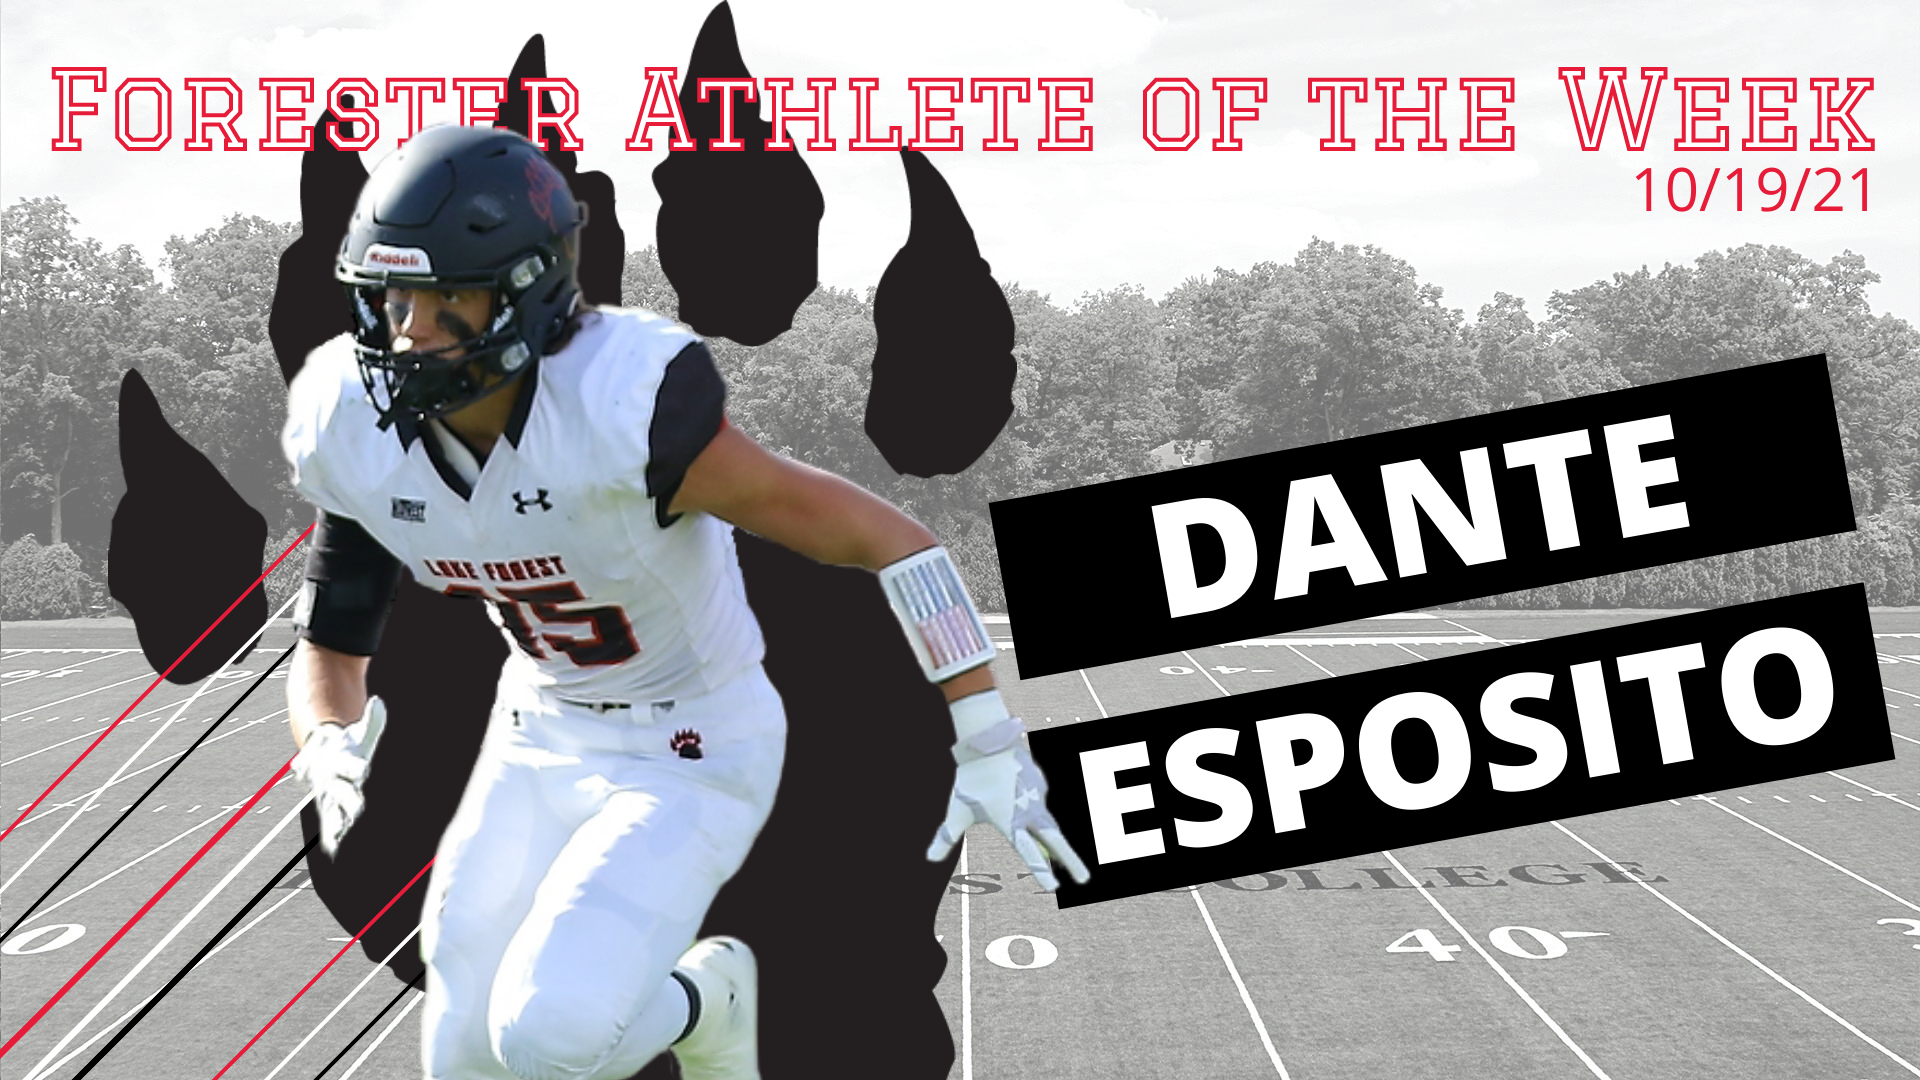 Dante Esposito Selected as Men's Forester Athlete of the Week Again